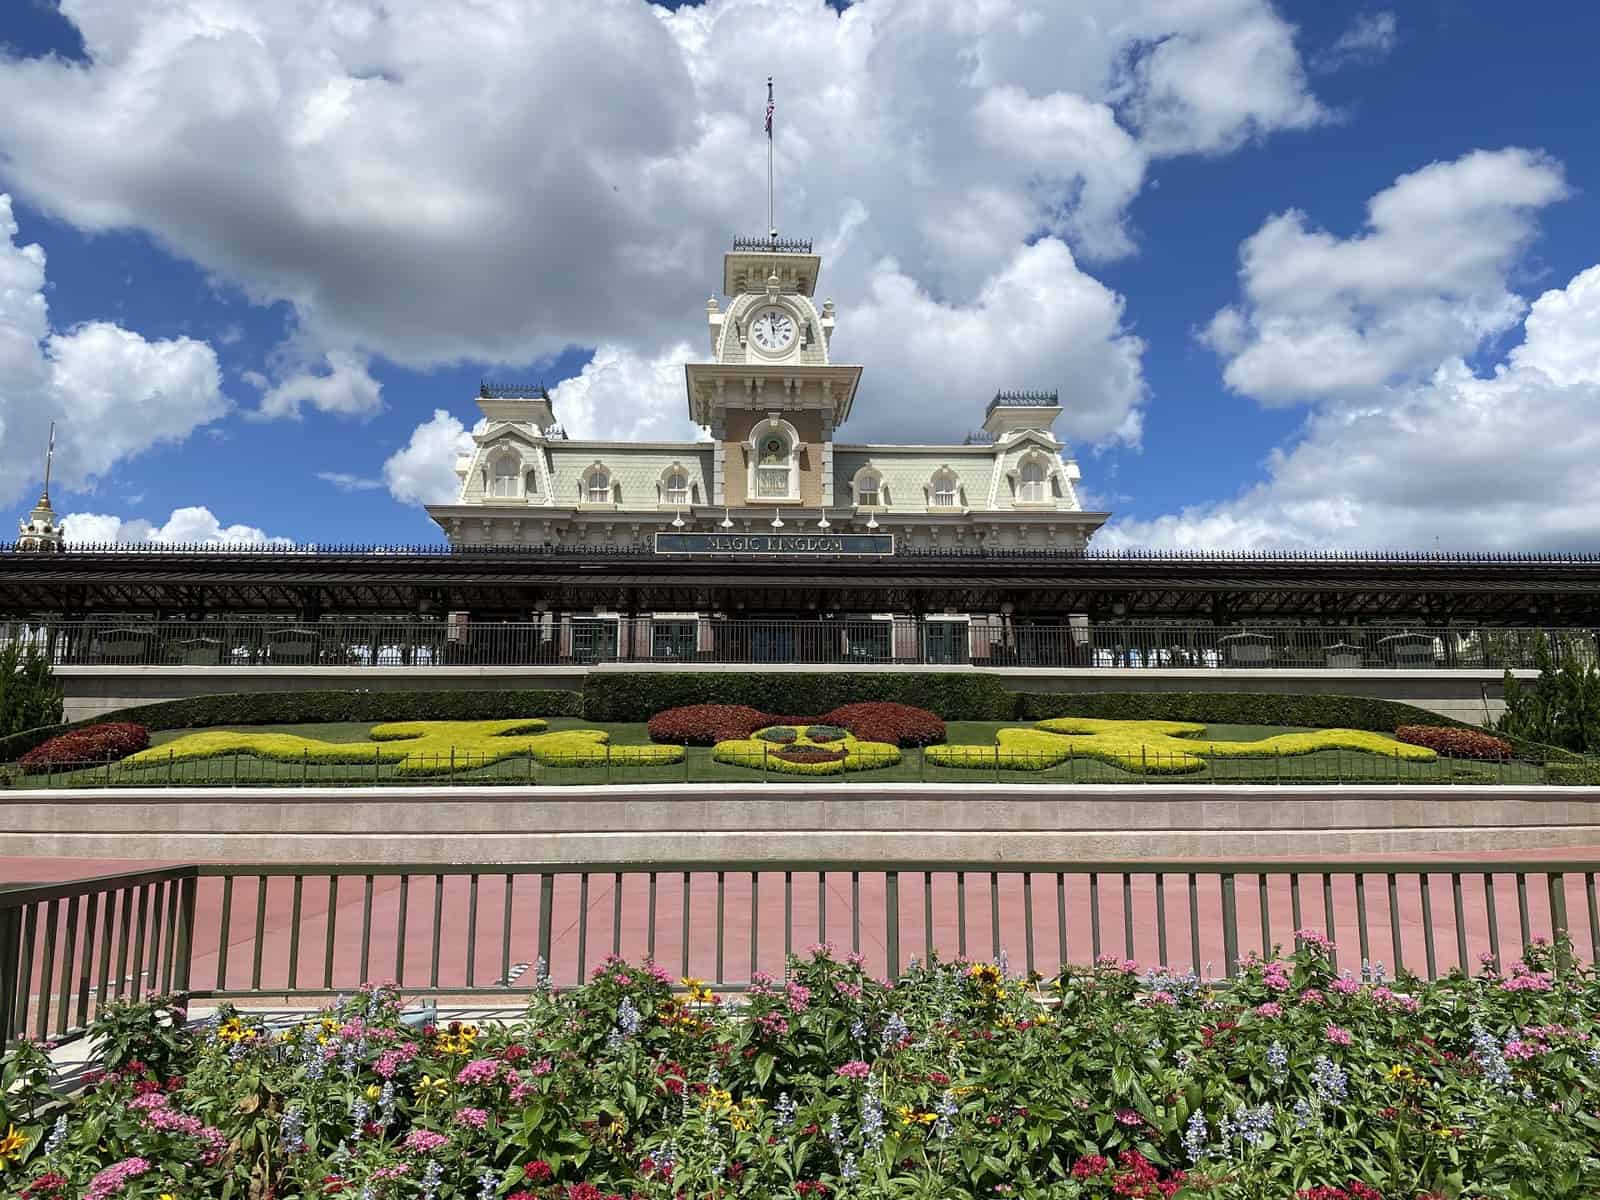 Walt Disney World Extends Park Hours For Two More Weekends In October